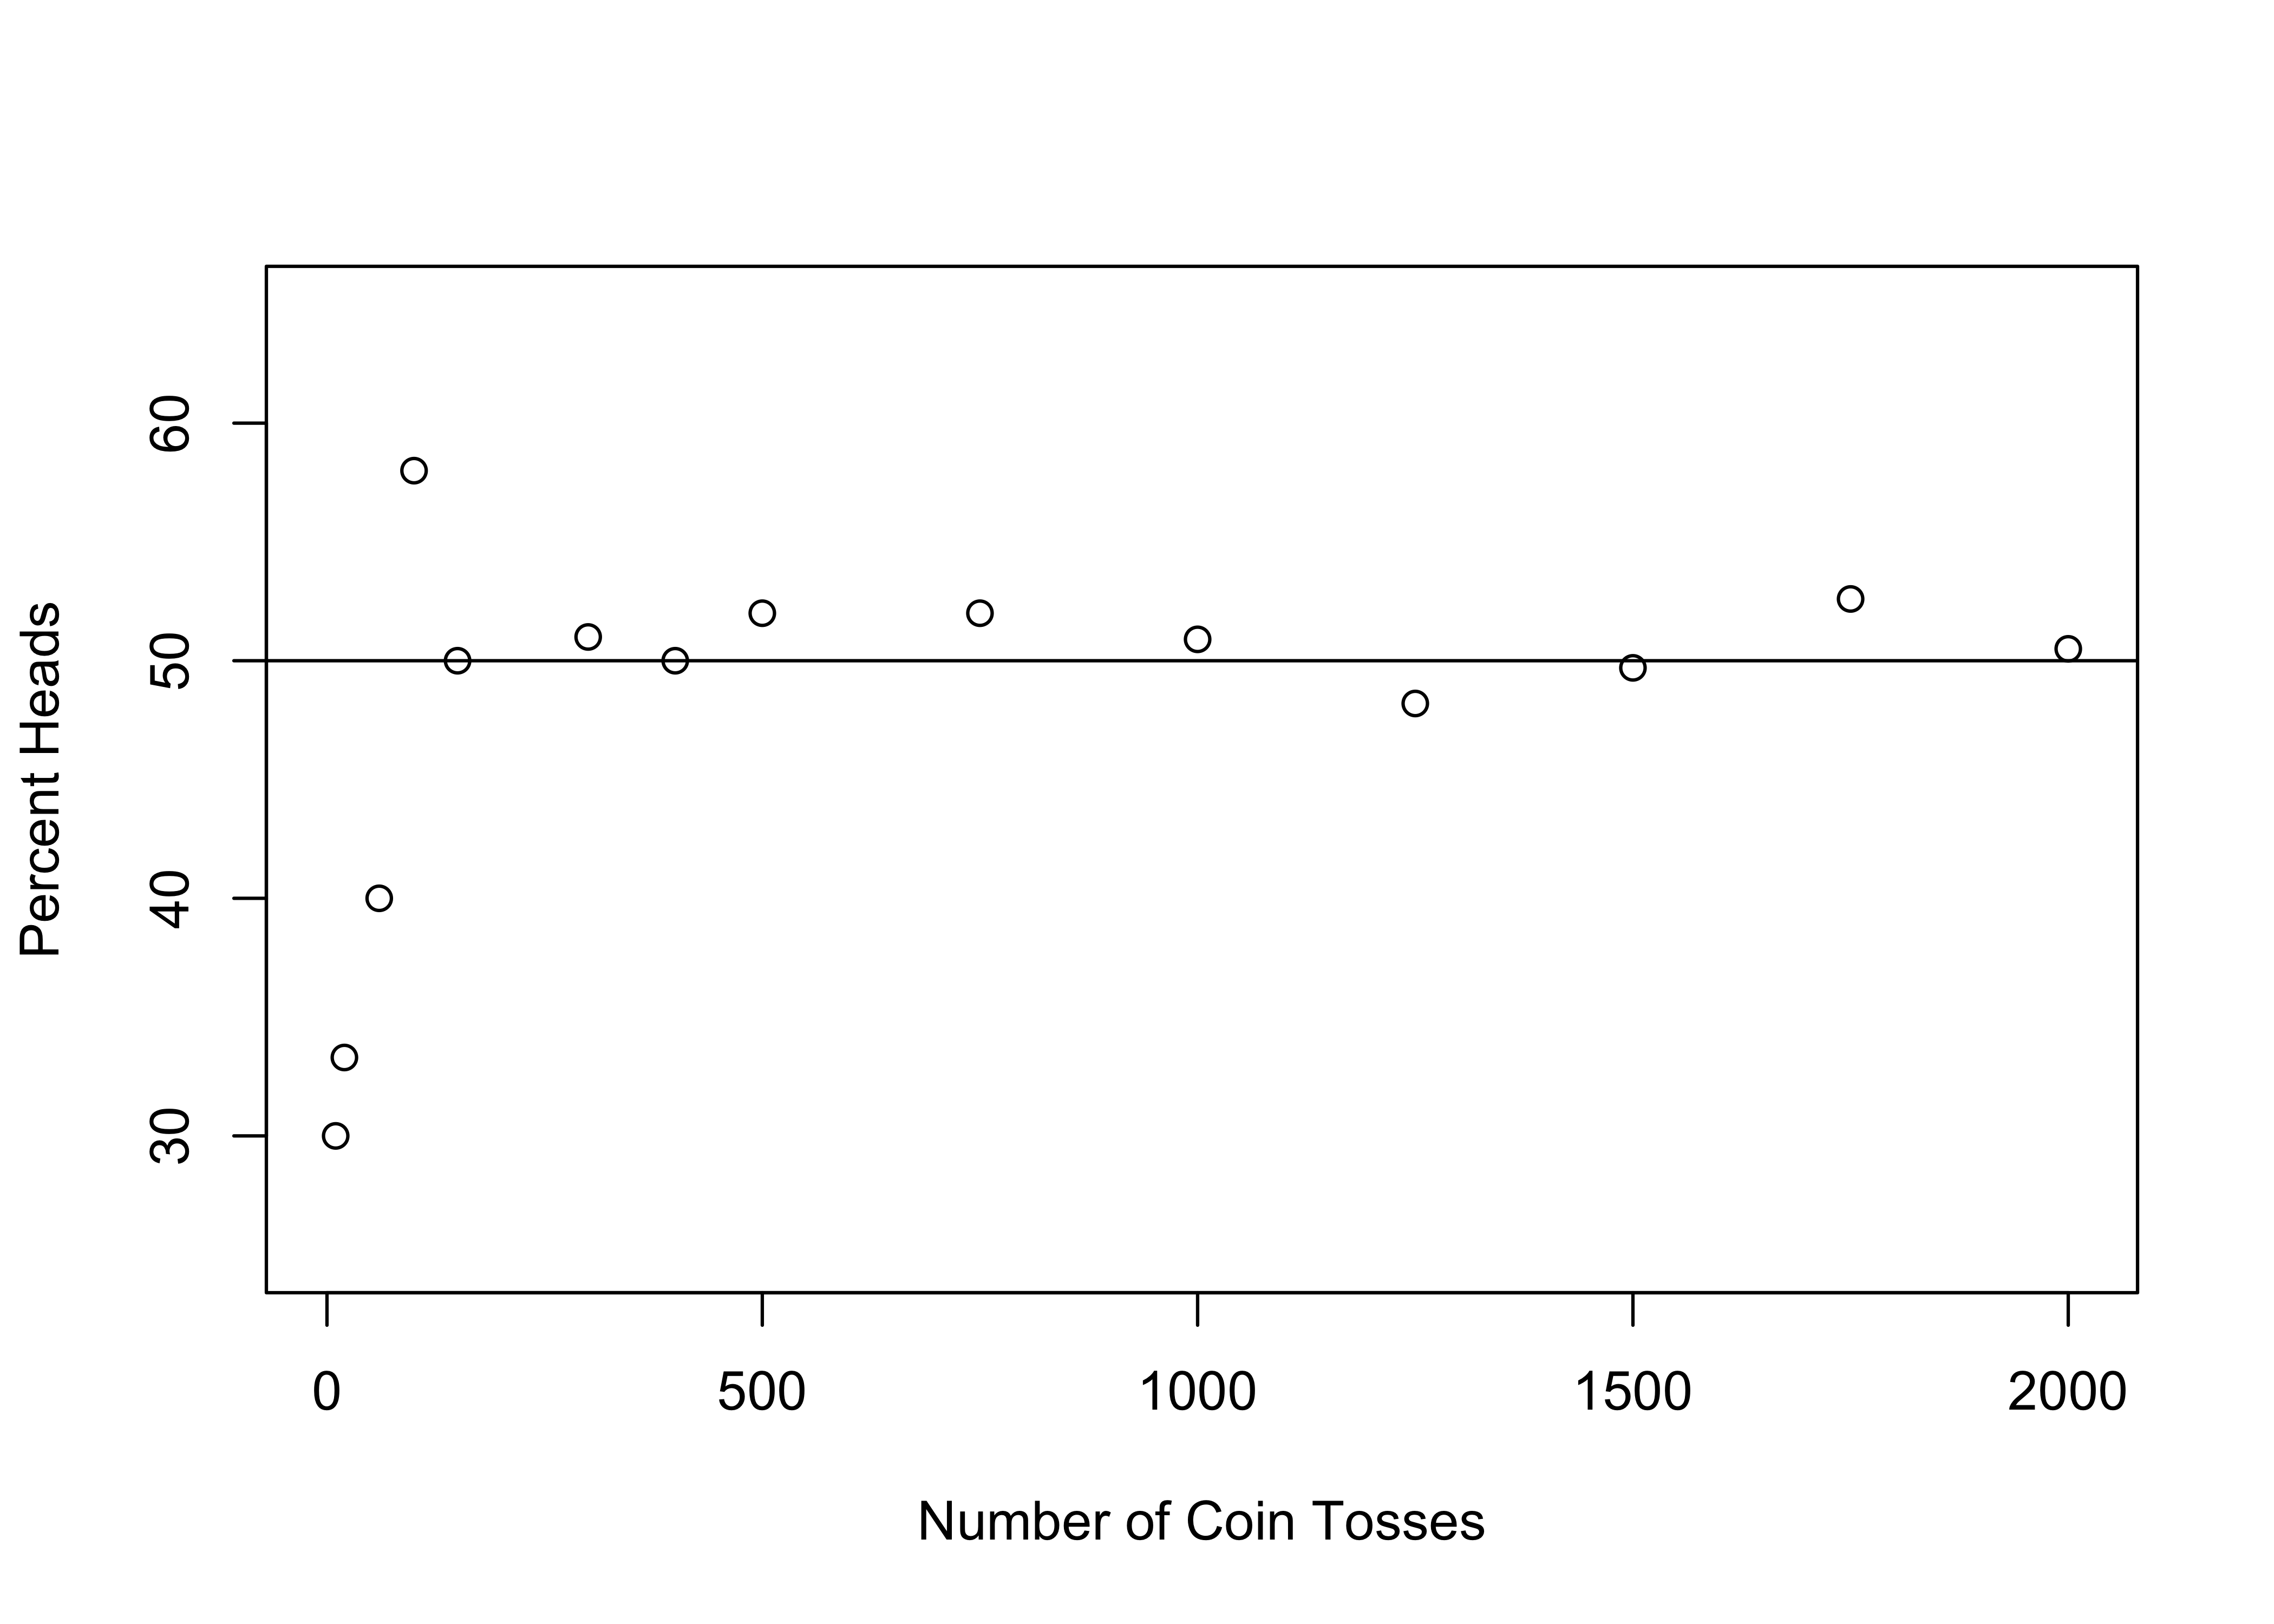 Simulated Results from Large and Small Coin Toss Samples